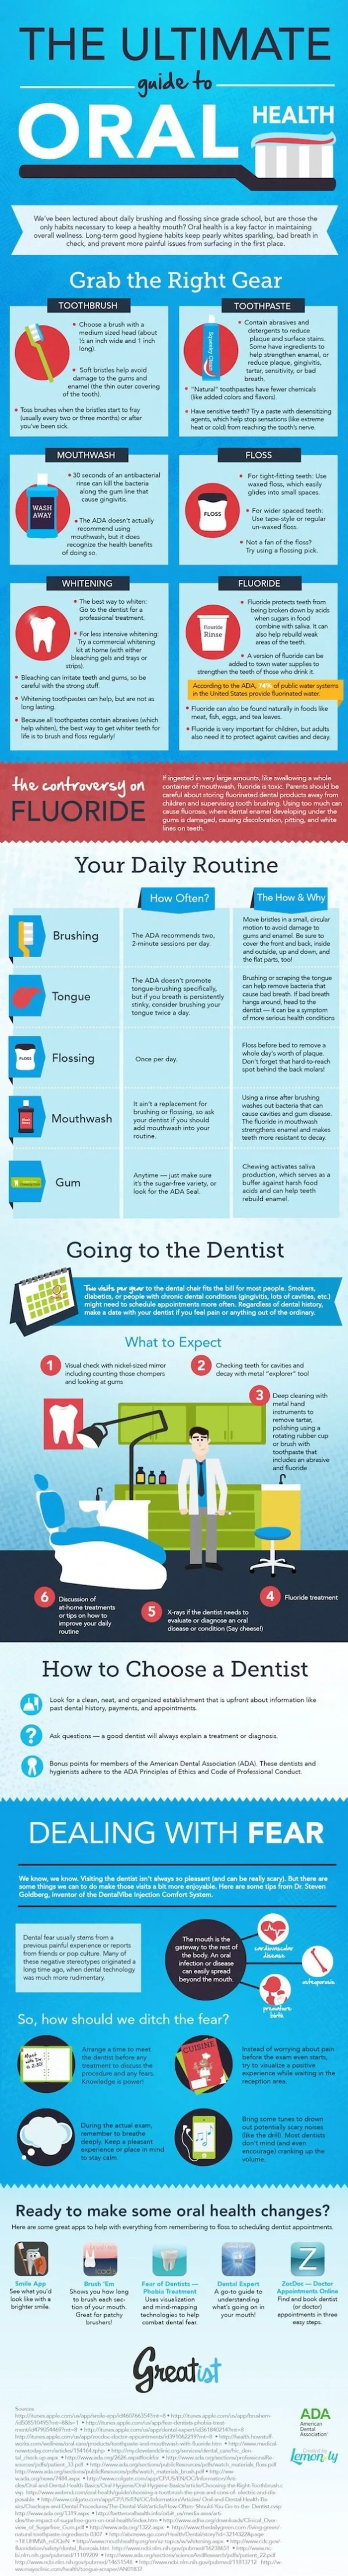 The Ultimate Guide to Oral Health